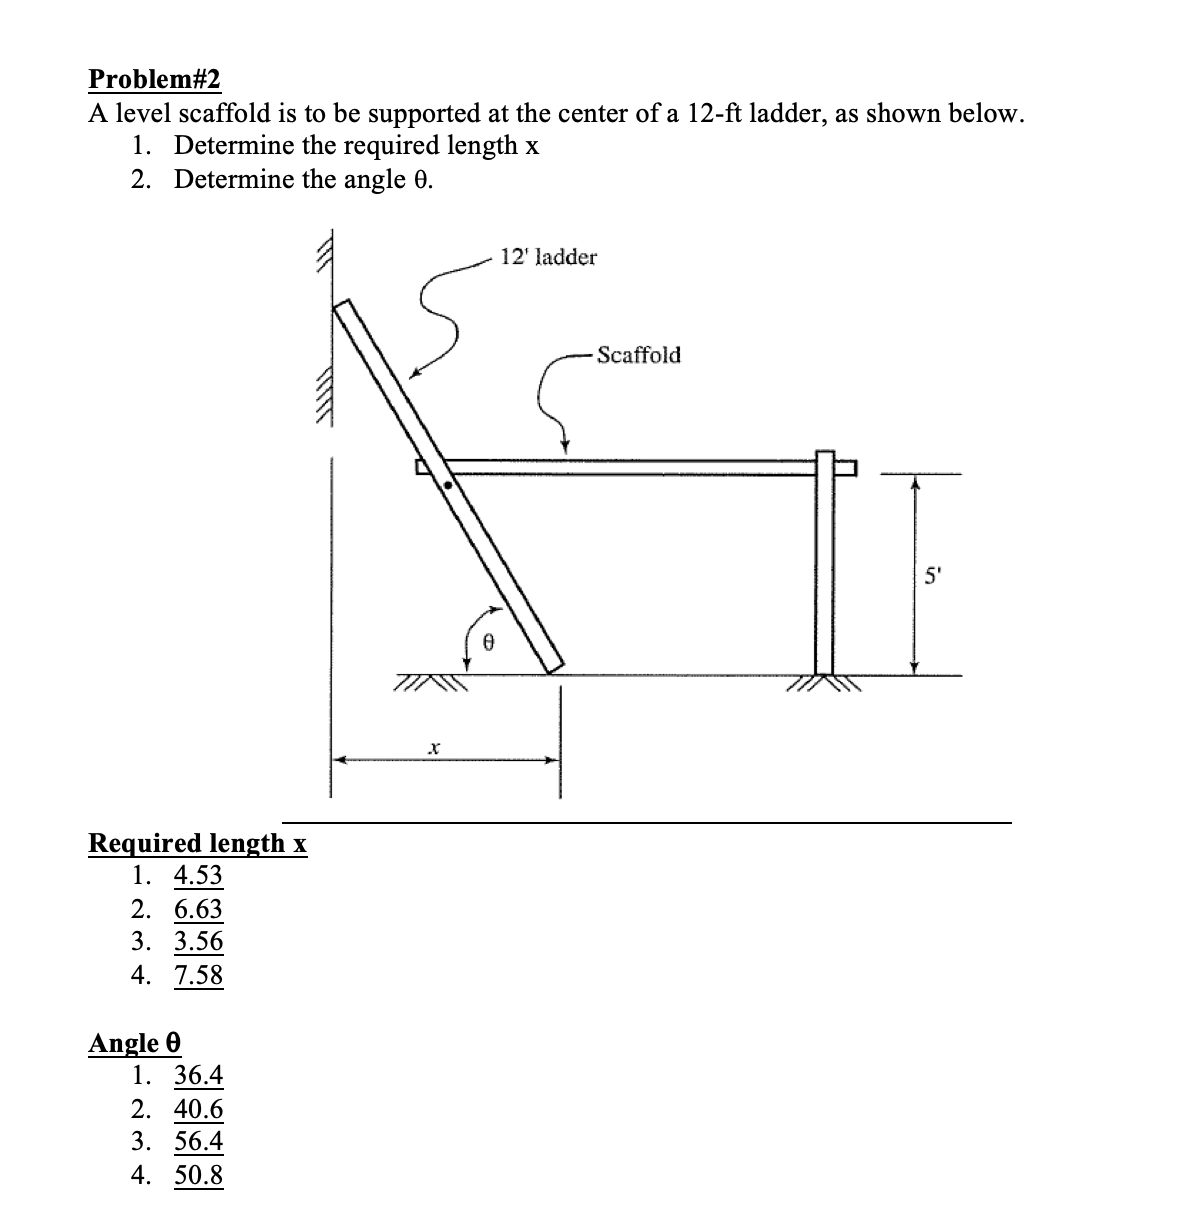 Problem#2
A level scaffold is to be supported at the center of a 12-ft ladder, as shown below.
1. Determine the required length x
2. Determine the angle 0.
Required length x
1. 4.53
2. 6.63
3. 3.56
4. 7.58
Angle 0
1. 36.4
2. 40.6
3. 56.4
4. 50.8
X
0
12' ladder
- Scaffold
5'